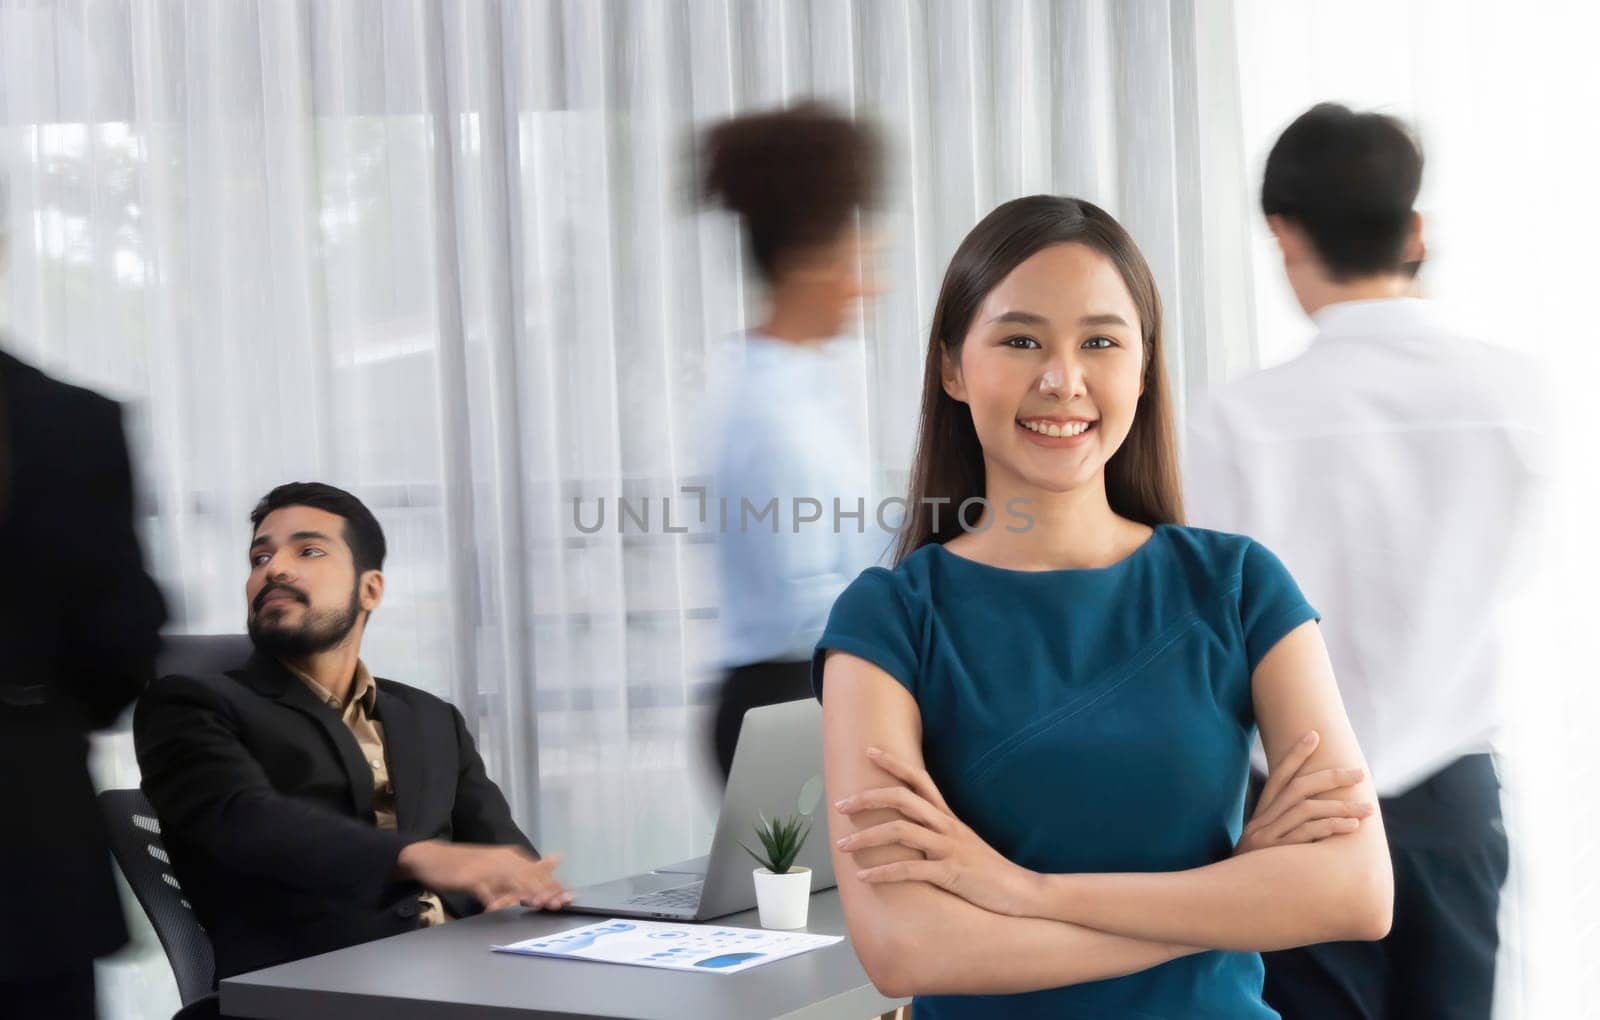 Young Asian businesswoman portrait poses confidently with diverse coworkers in busy meeting room in motion blurred background. Multicultural team works together for business success. Concord